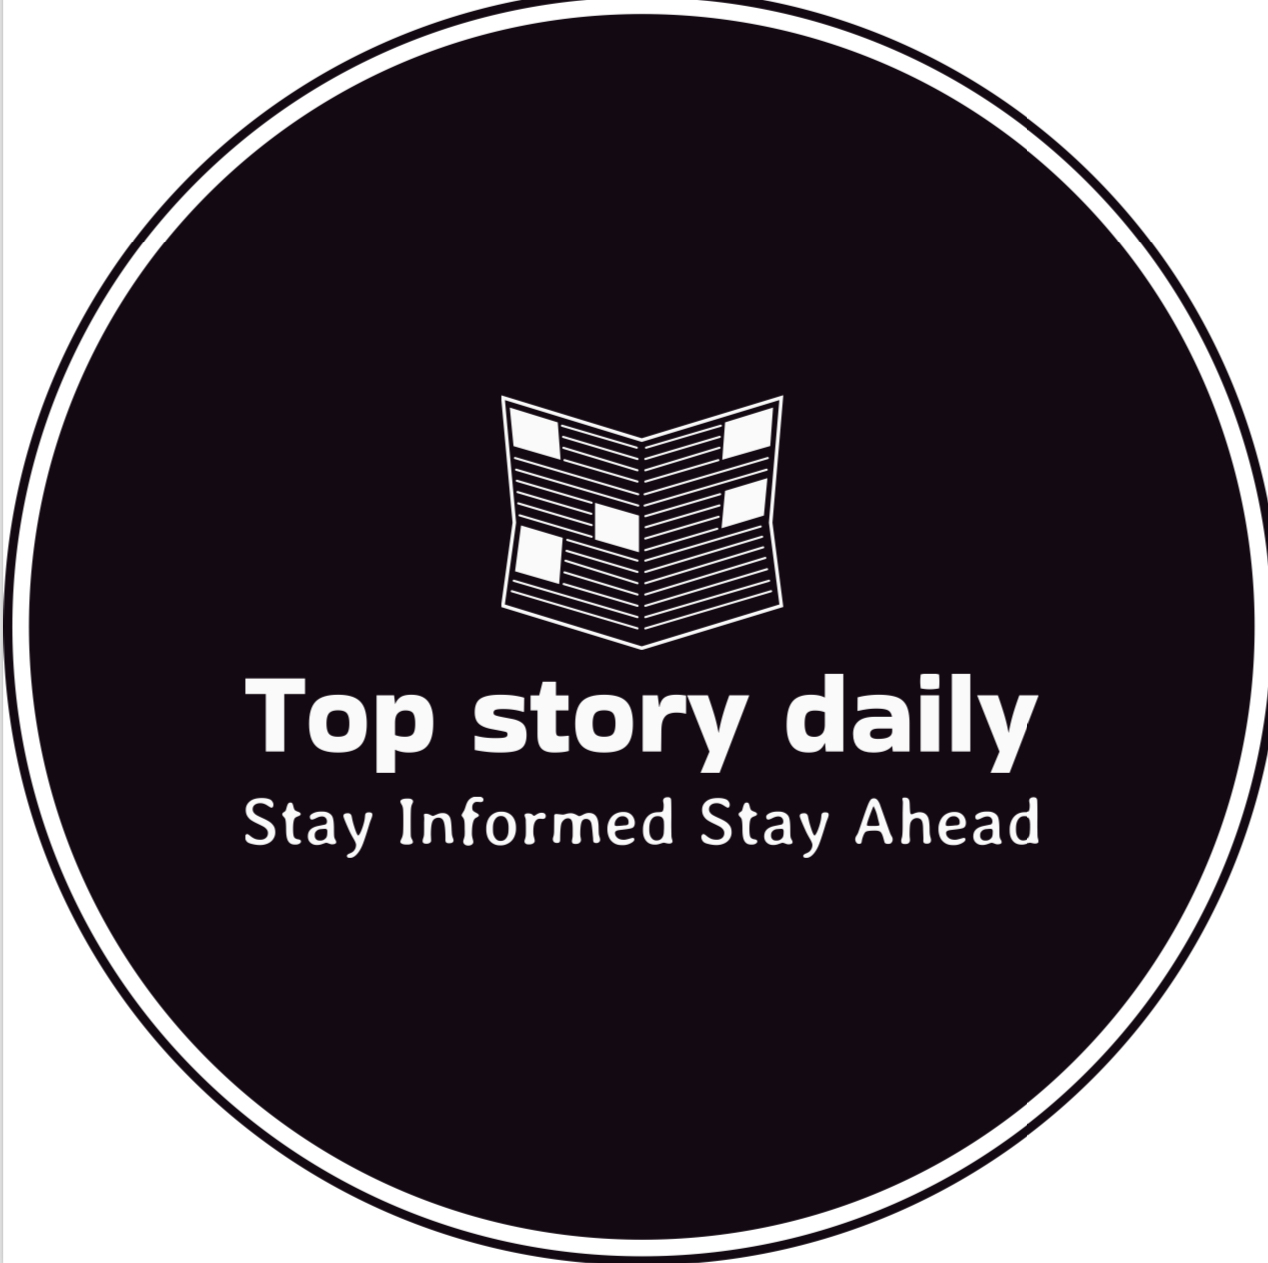 Top story daily